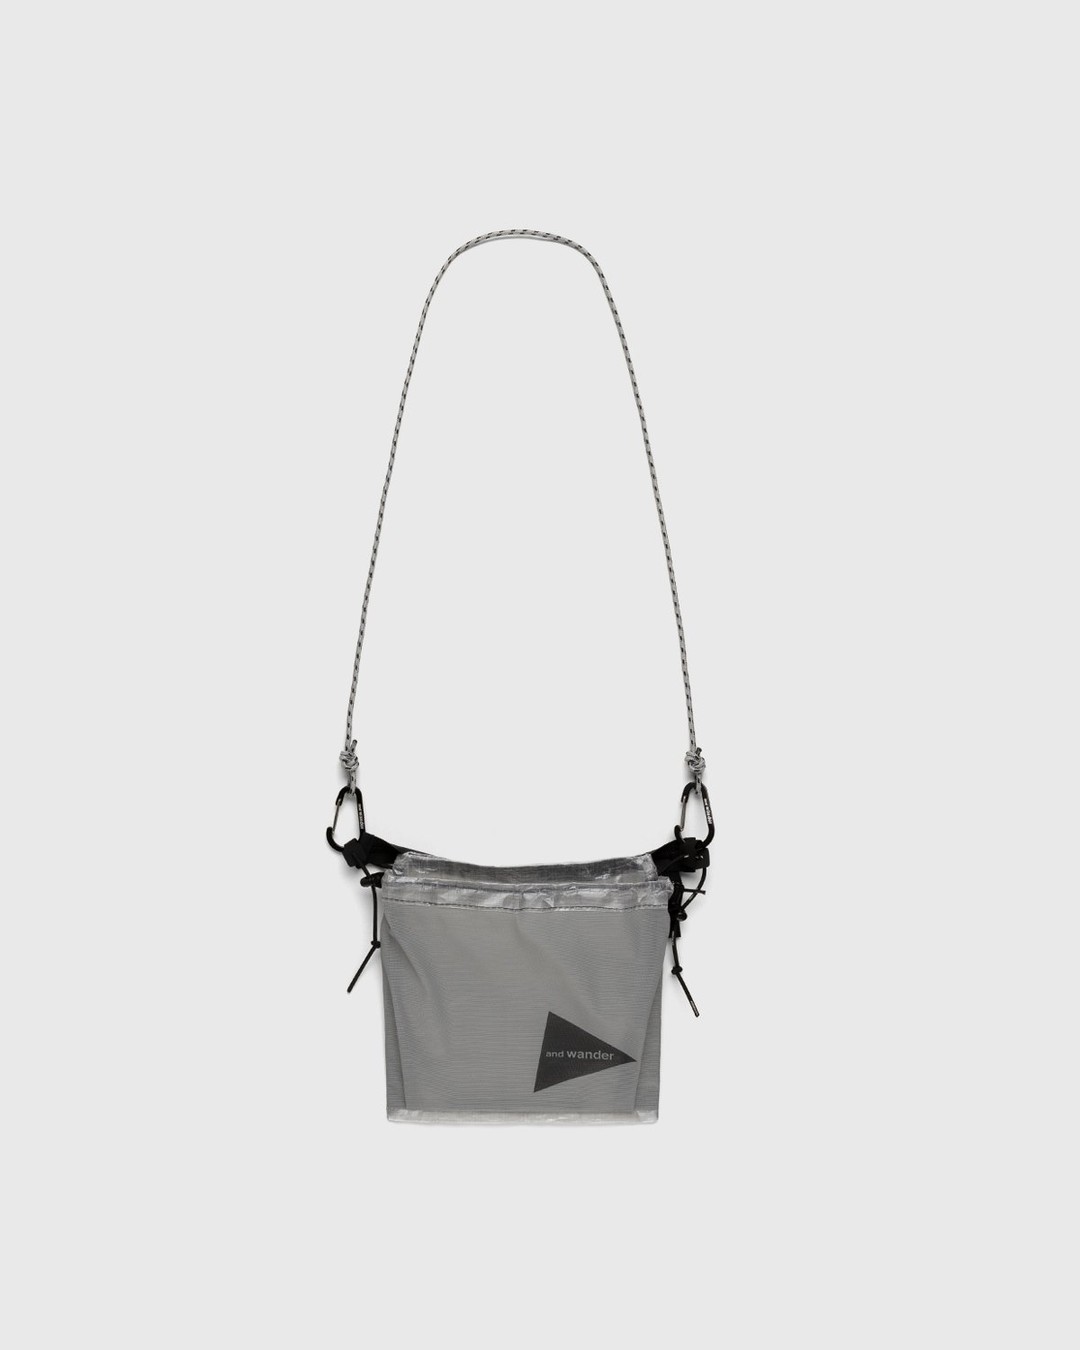 And Wander – Dyneema Satchel White - Pouches - White - Image 1